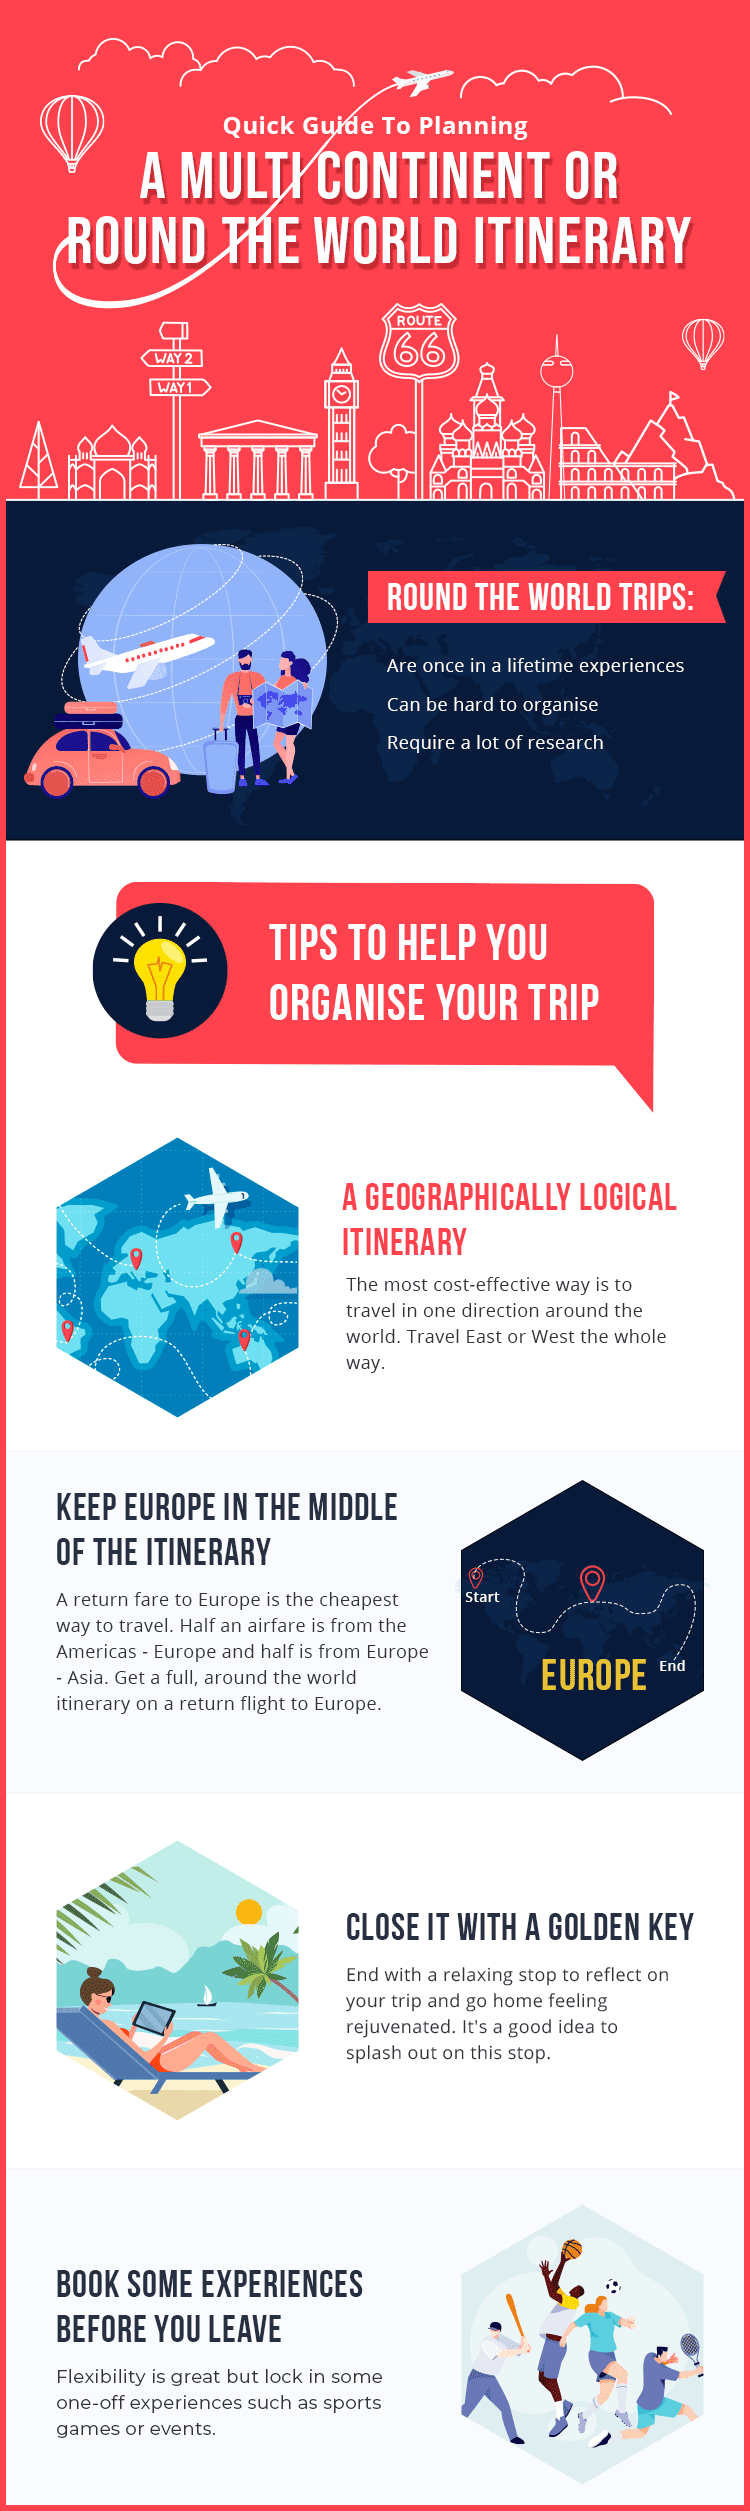 Quick Guide To Planning A Multi Continent Or Round The World Itinerary